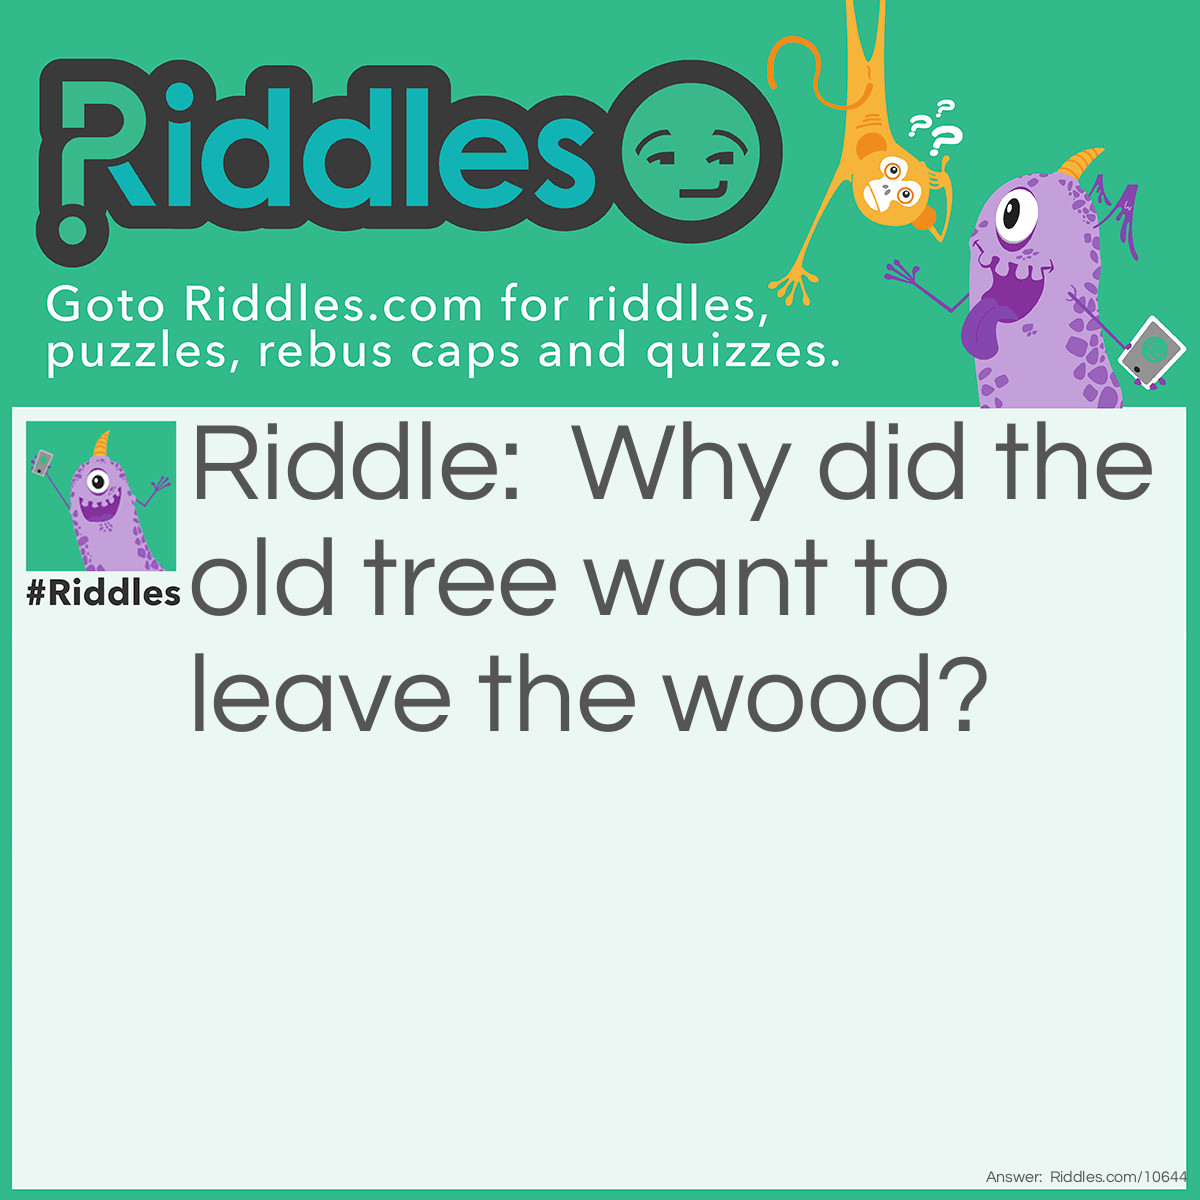 Riddle: Why did the old tree want to leave the wood? Answer: It wanted to BOUGH out.